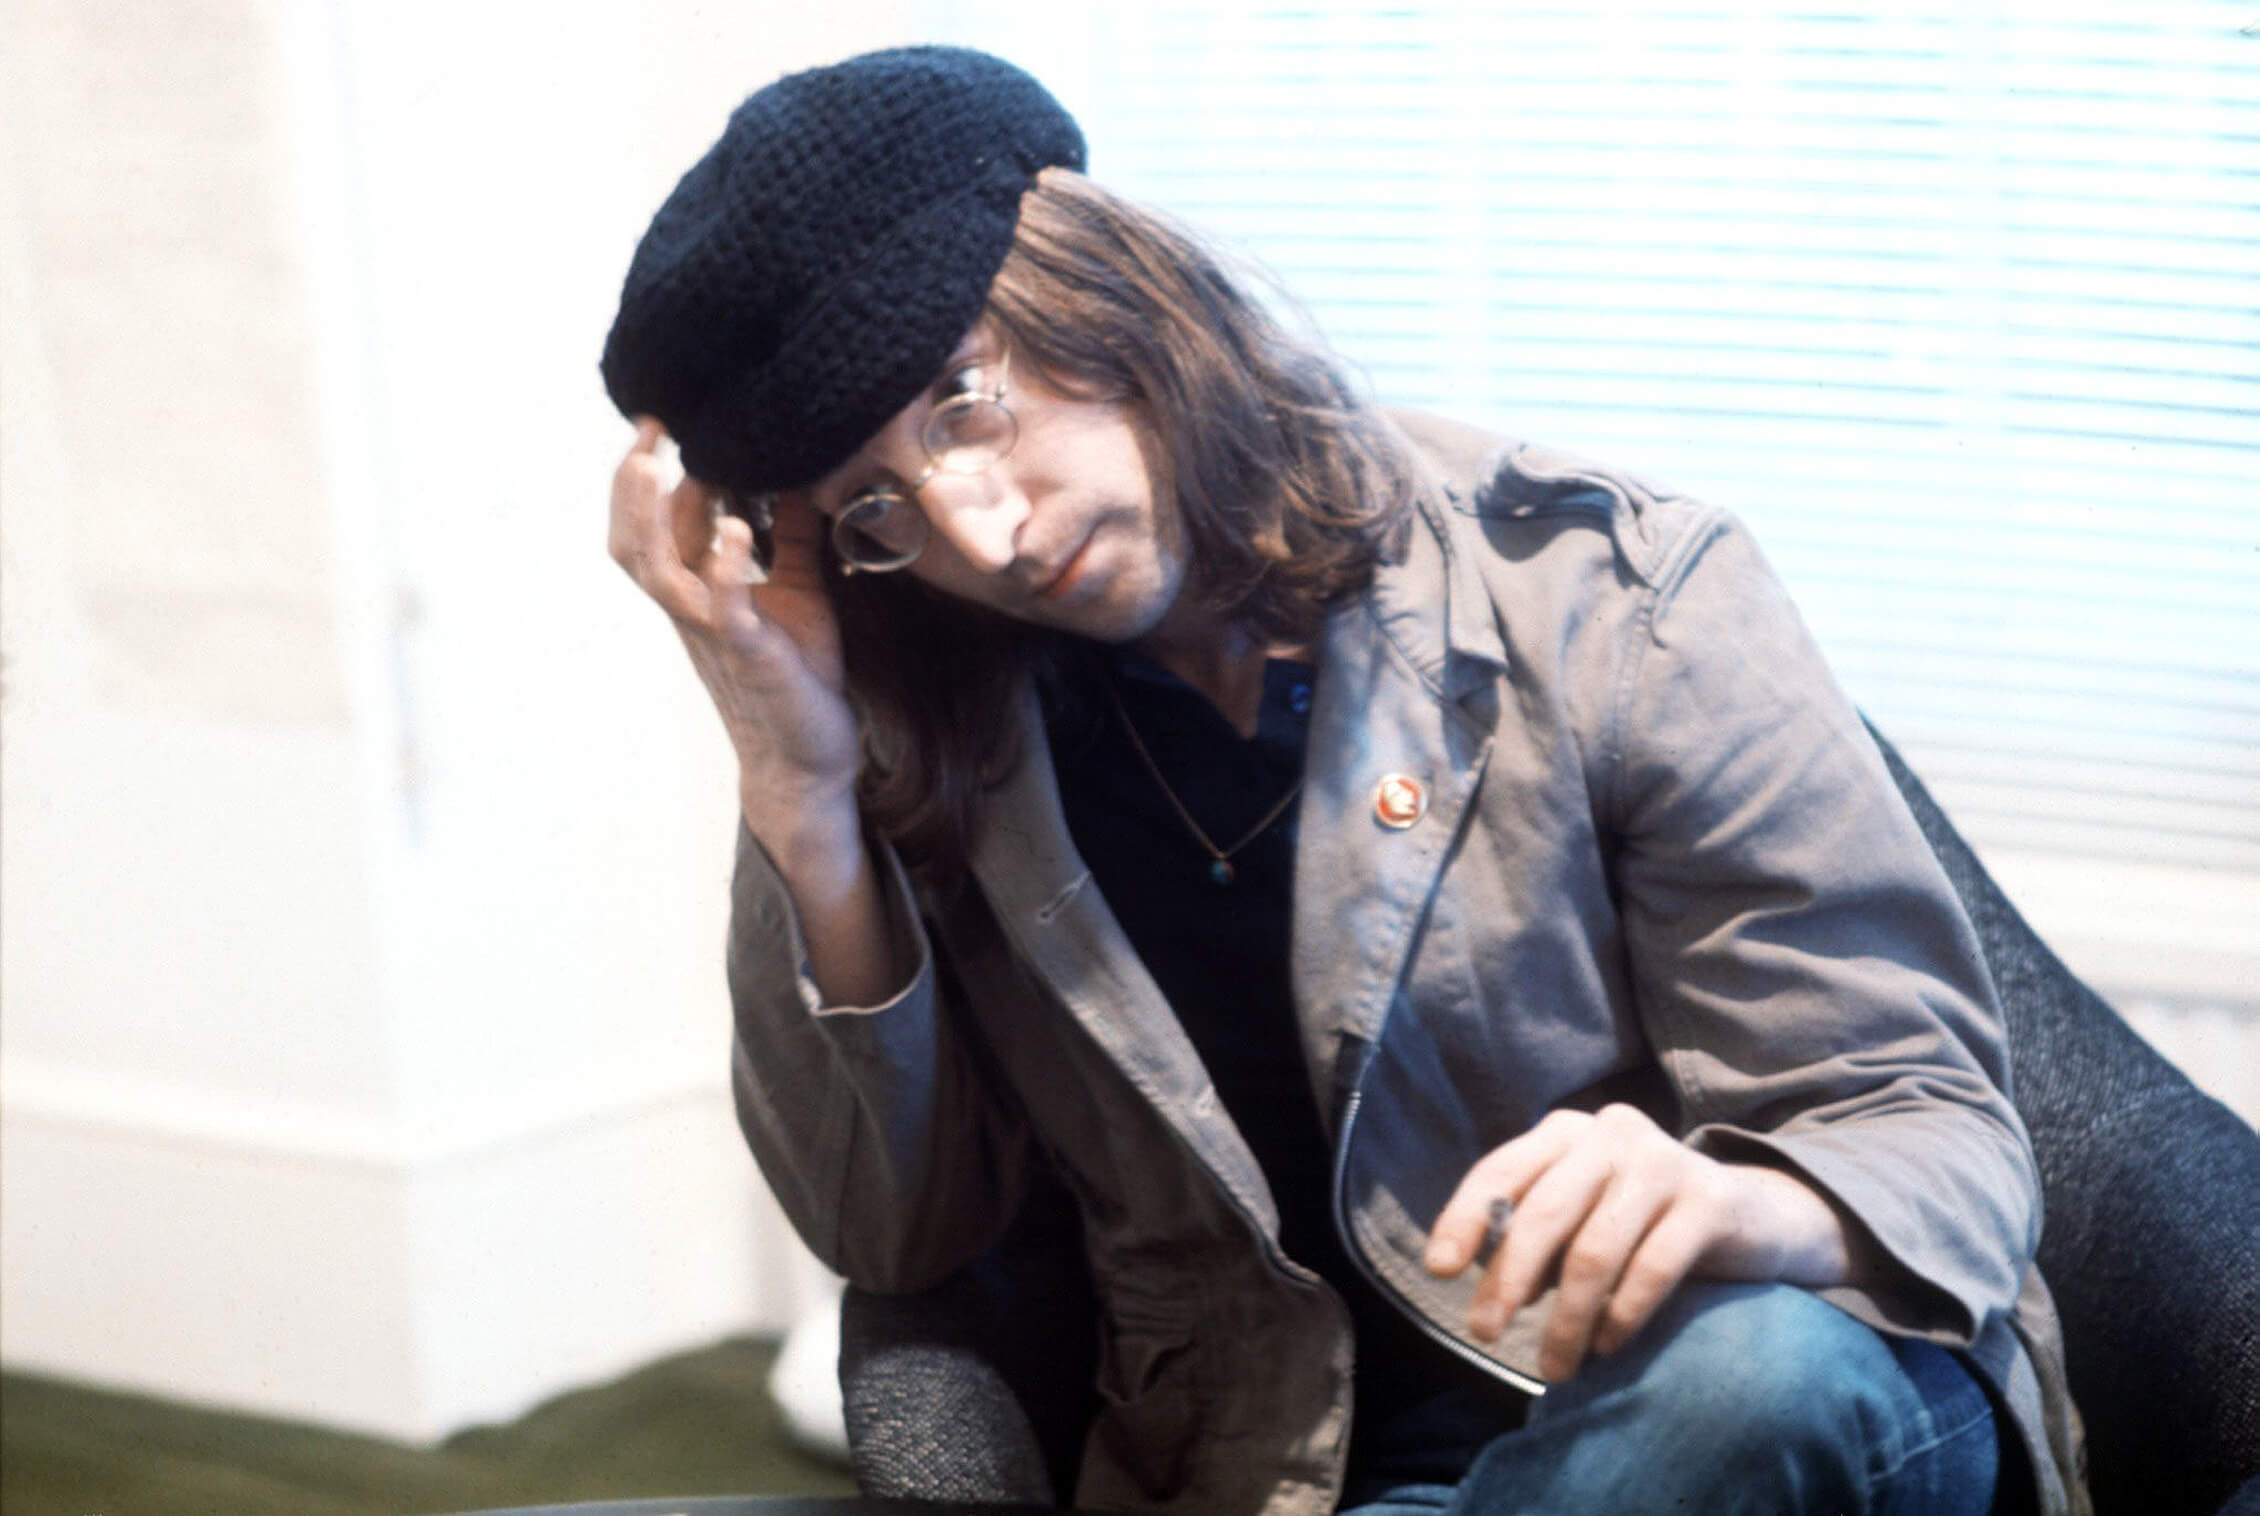 "Give peace a chance" singer John Lennon with a hat